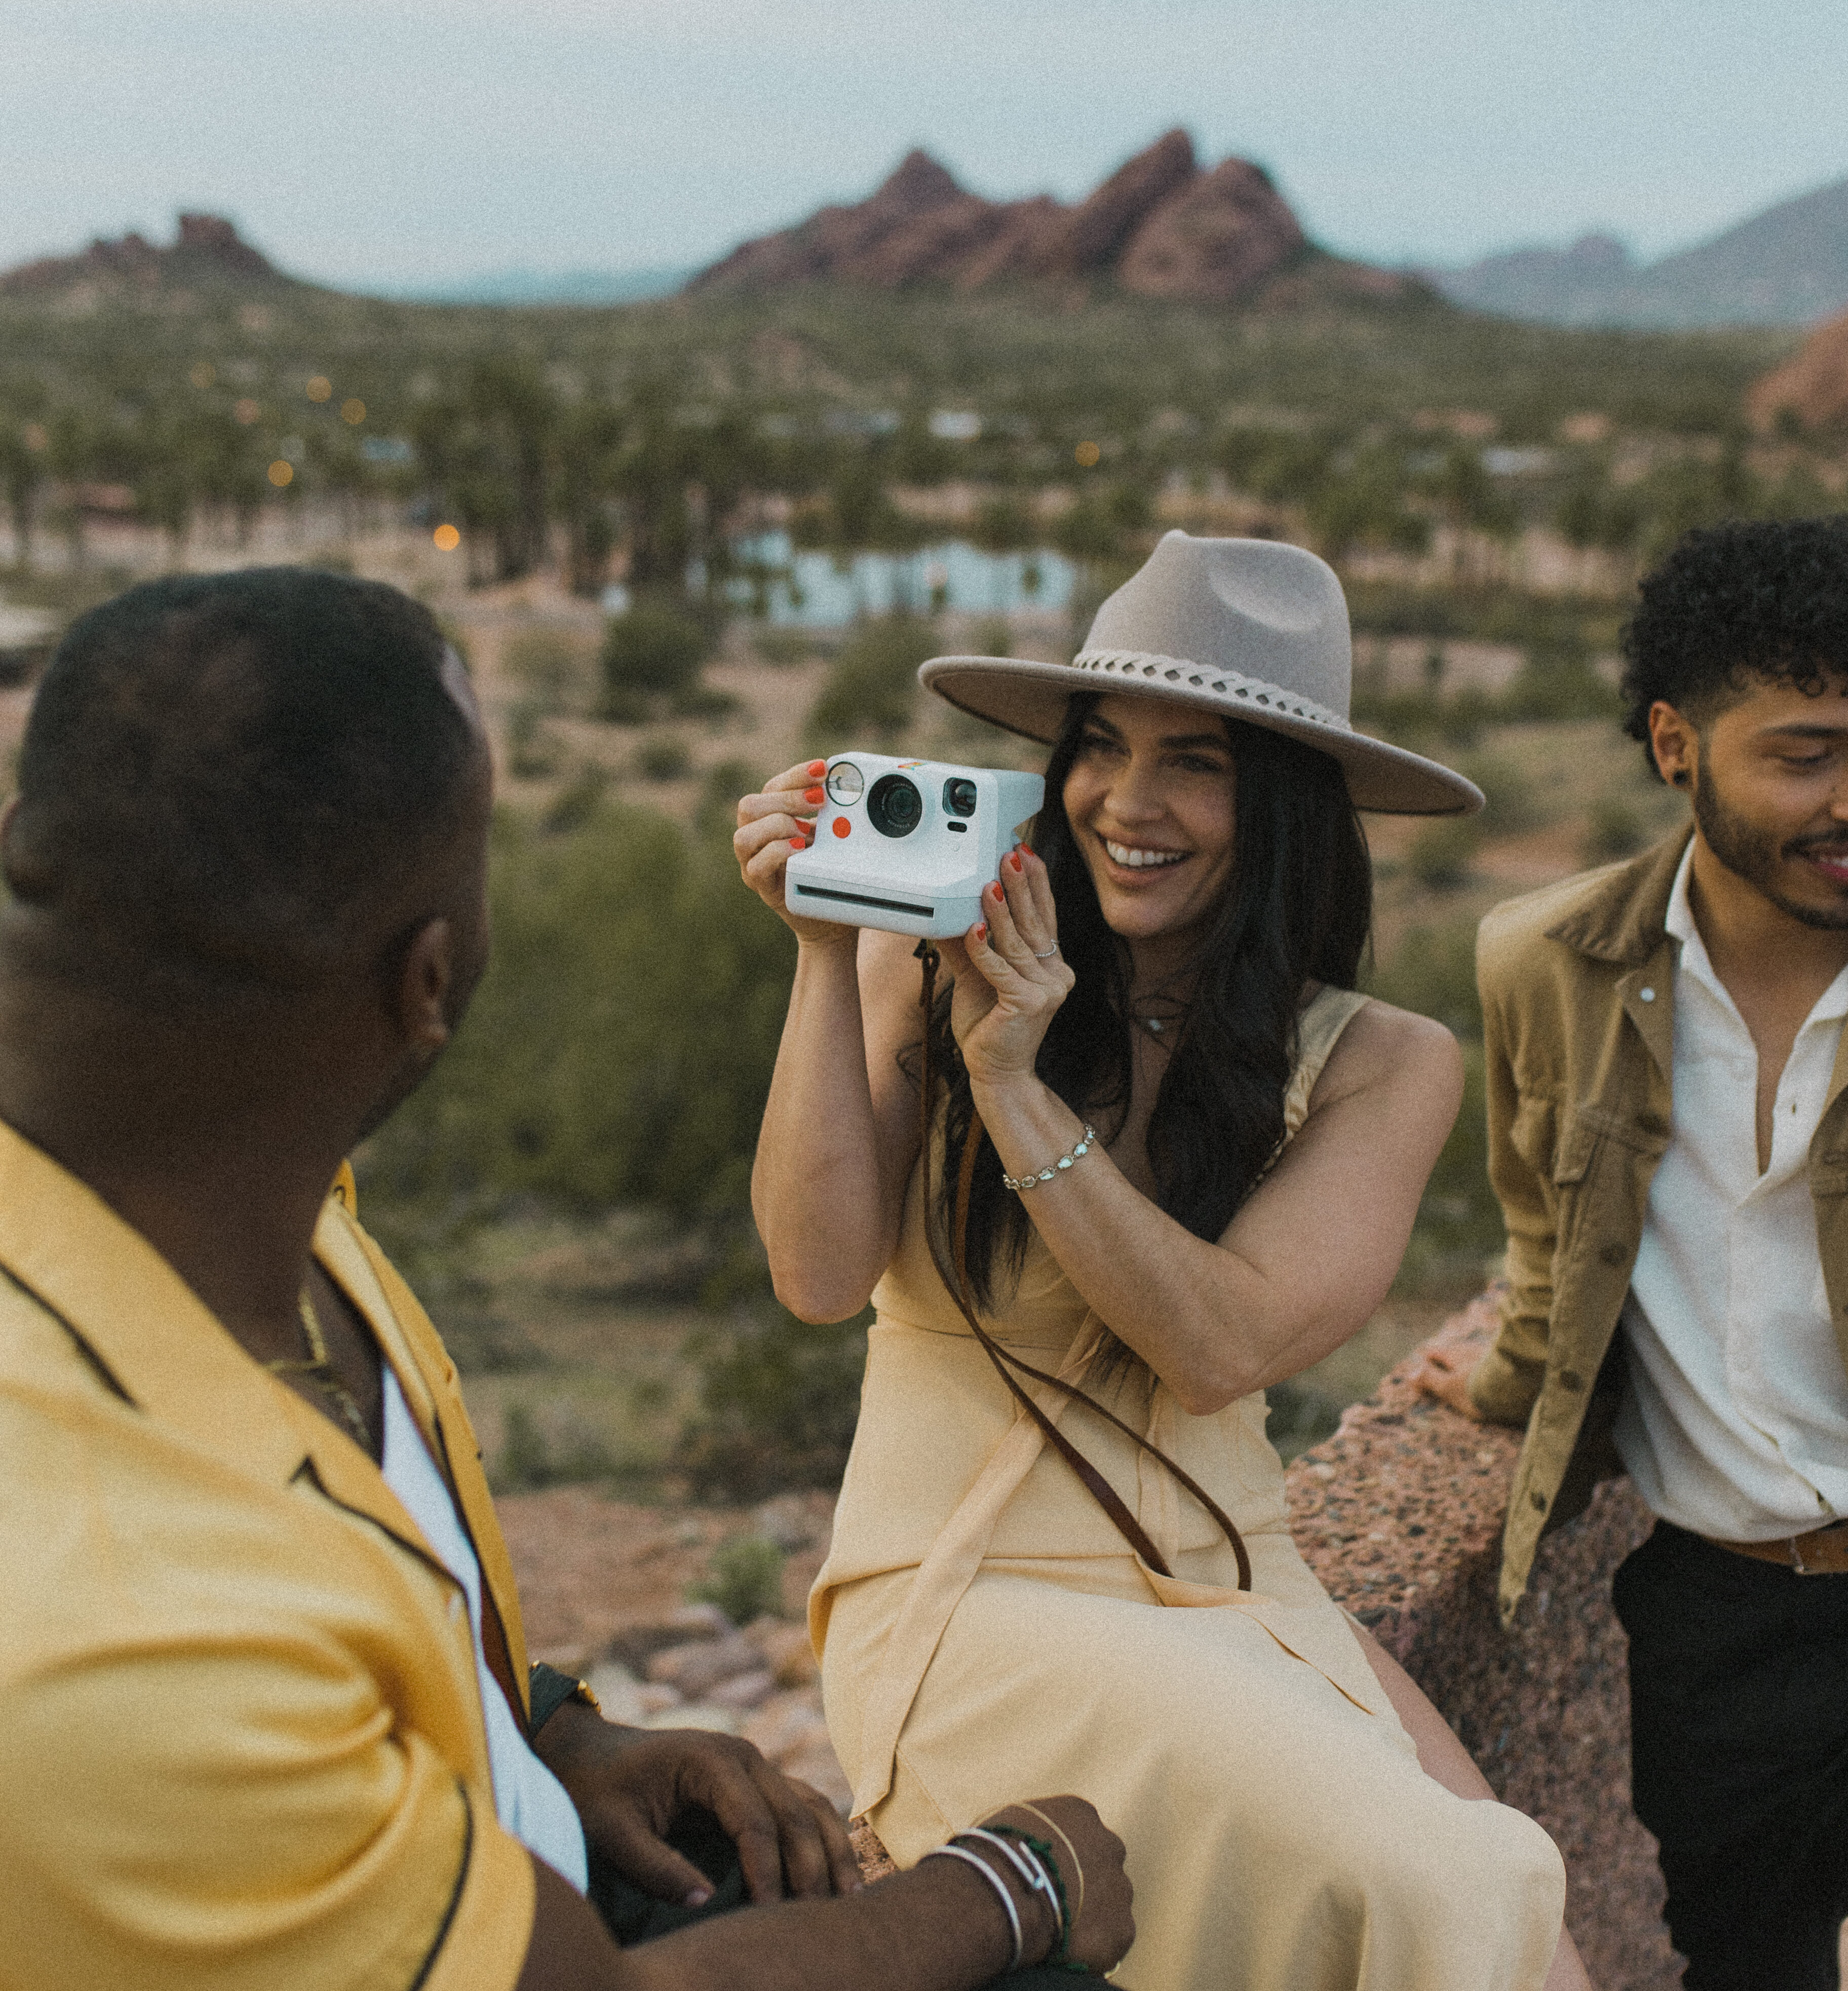 Girl taking a photo with a camera with Phoenix desert views